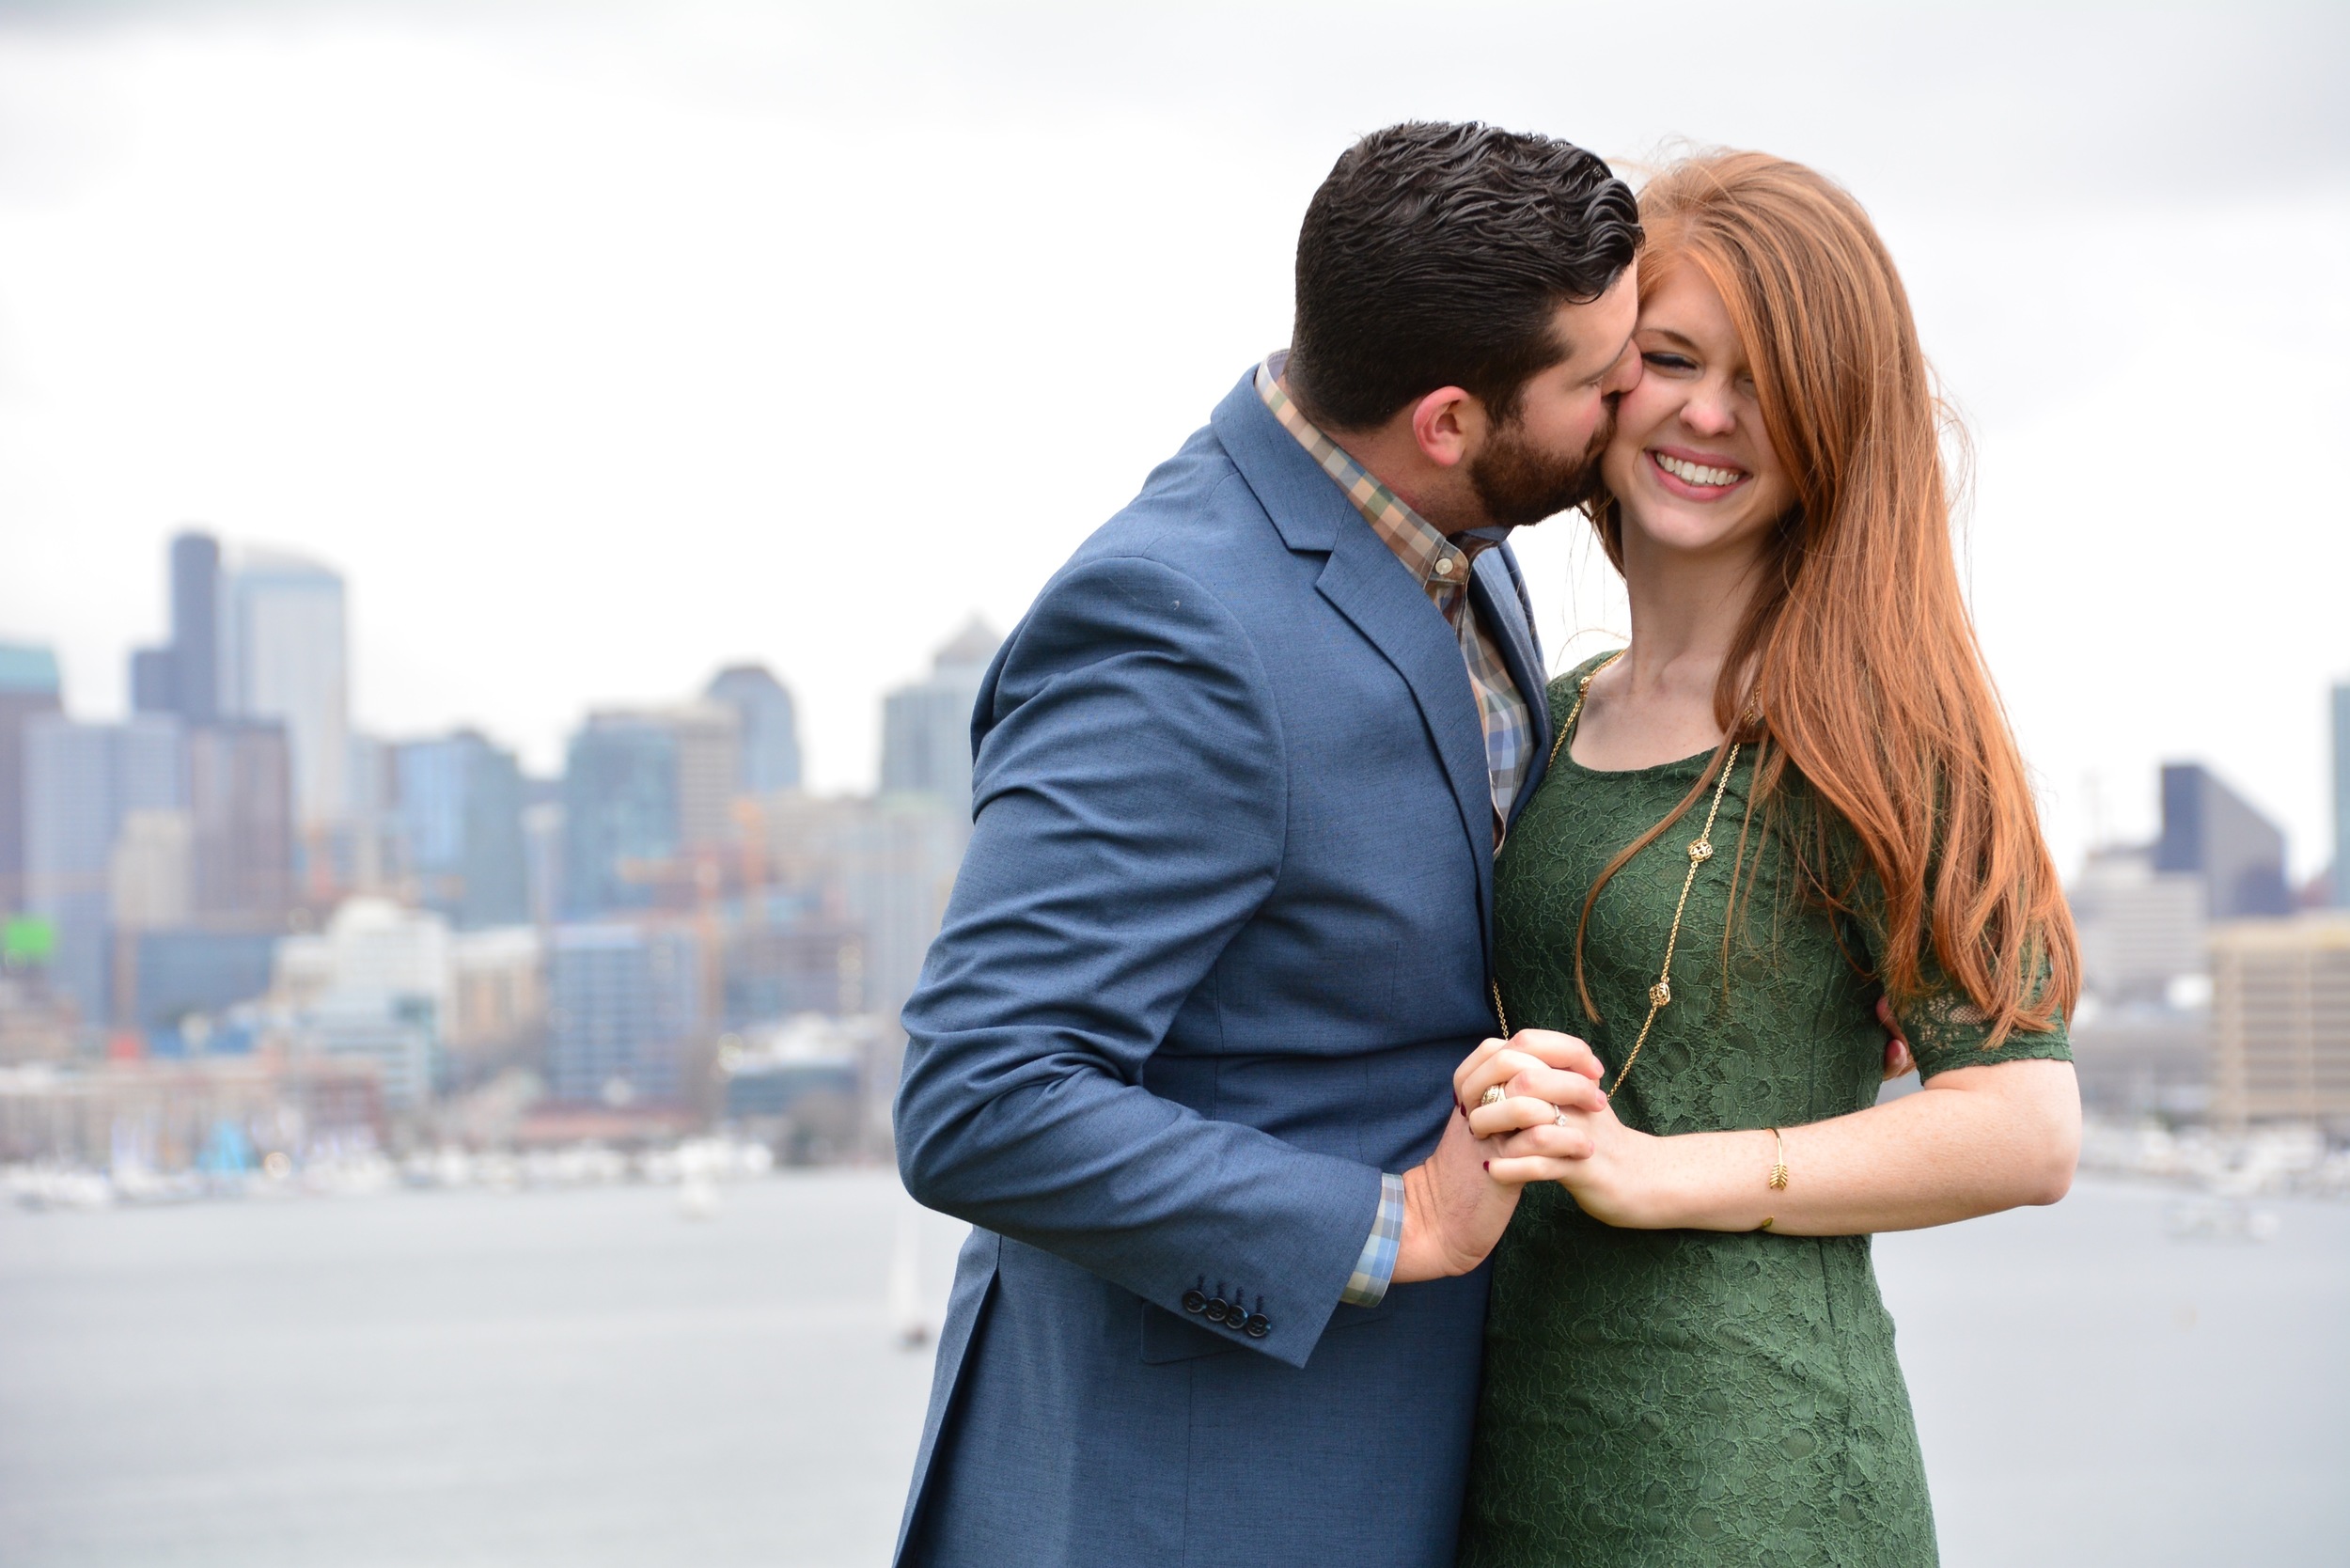 heidi lockhart somes photography, gasworks park, seattle, washington, engagement photos, what to wear for your engagement photos. green lace dress